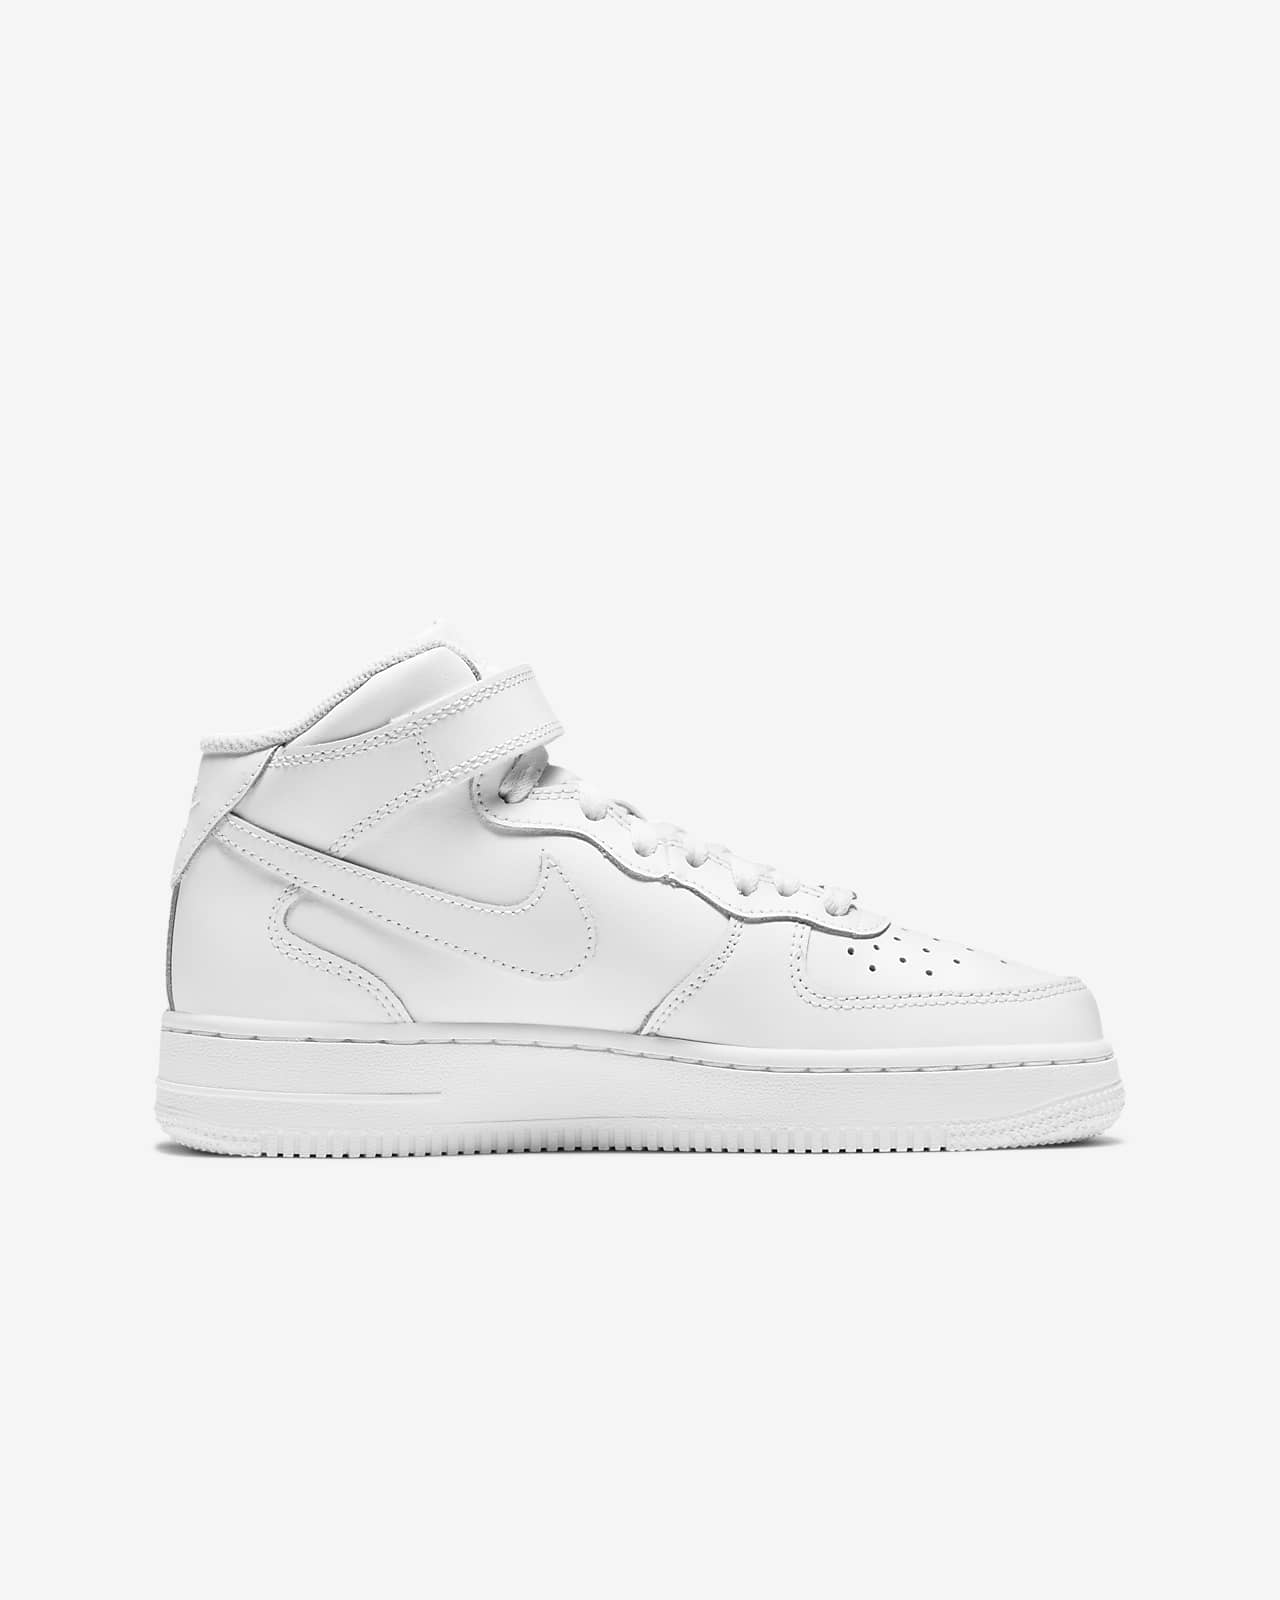 mens nike air force one mid